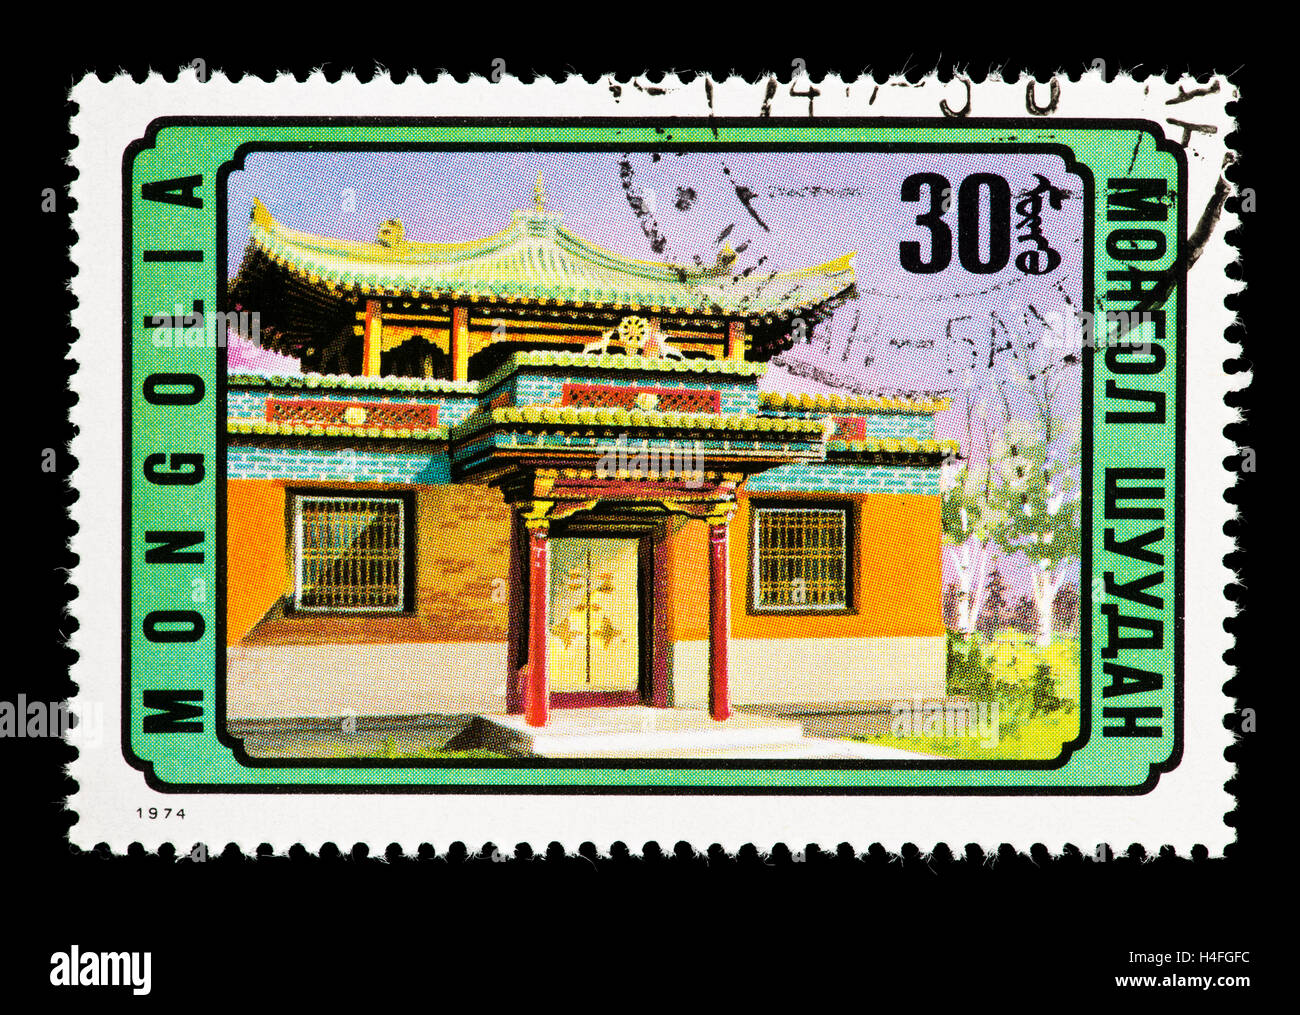 Postage stamp from Mongolia depicting the entrance to Charity Temple, Ulan Bator Stock Photo